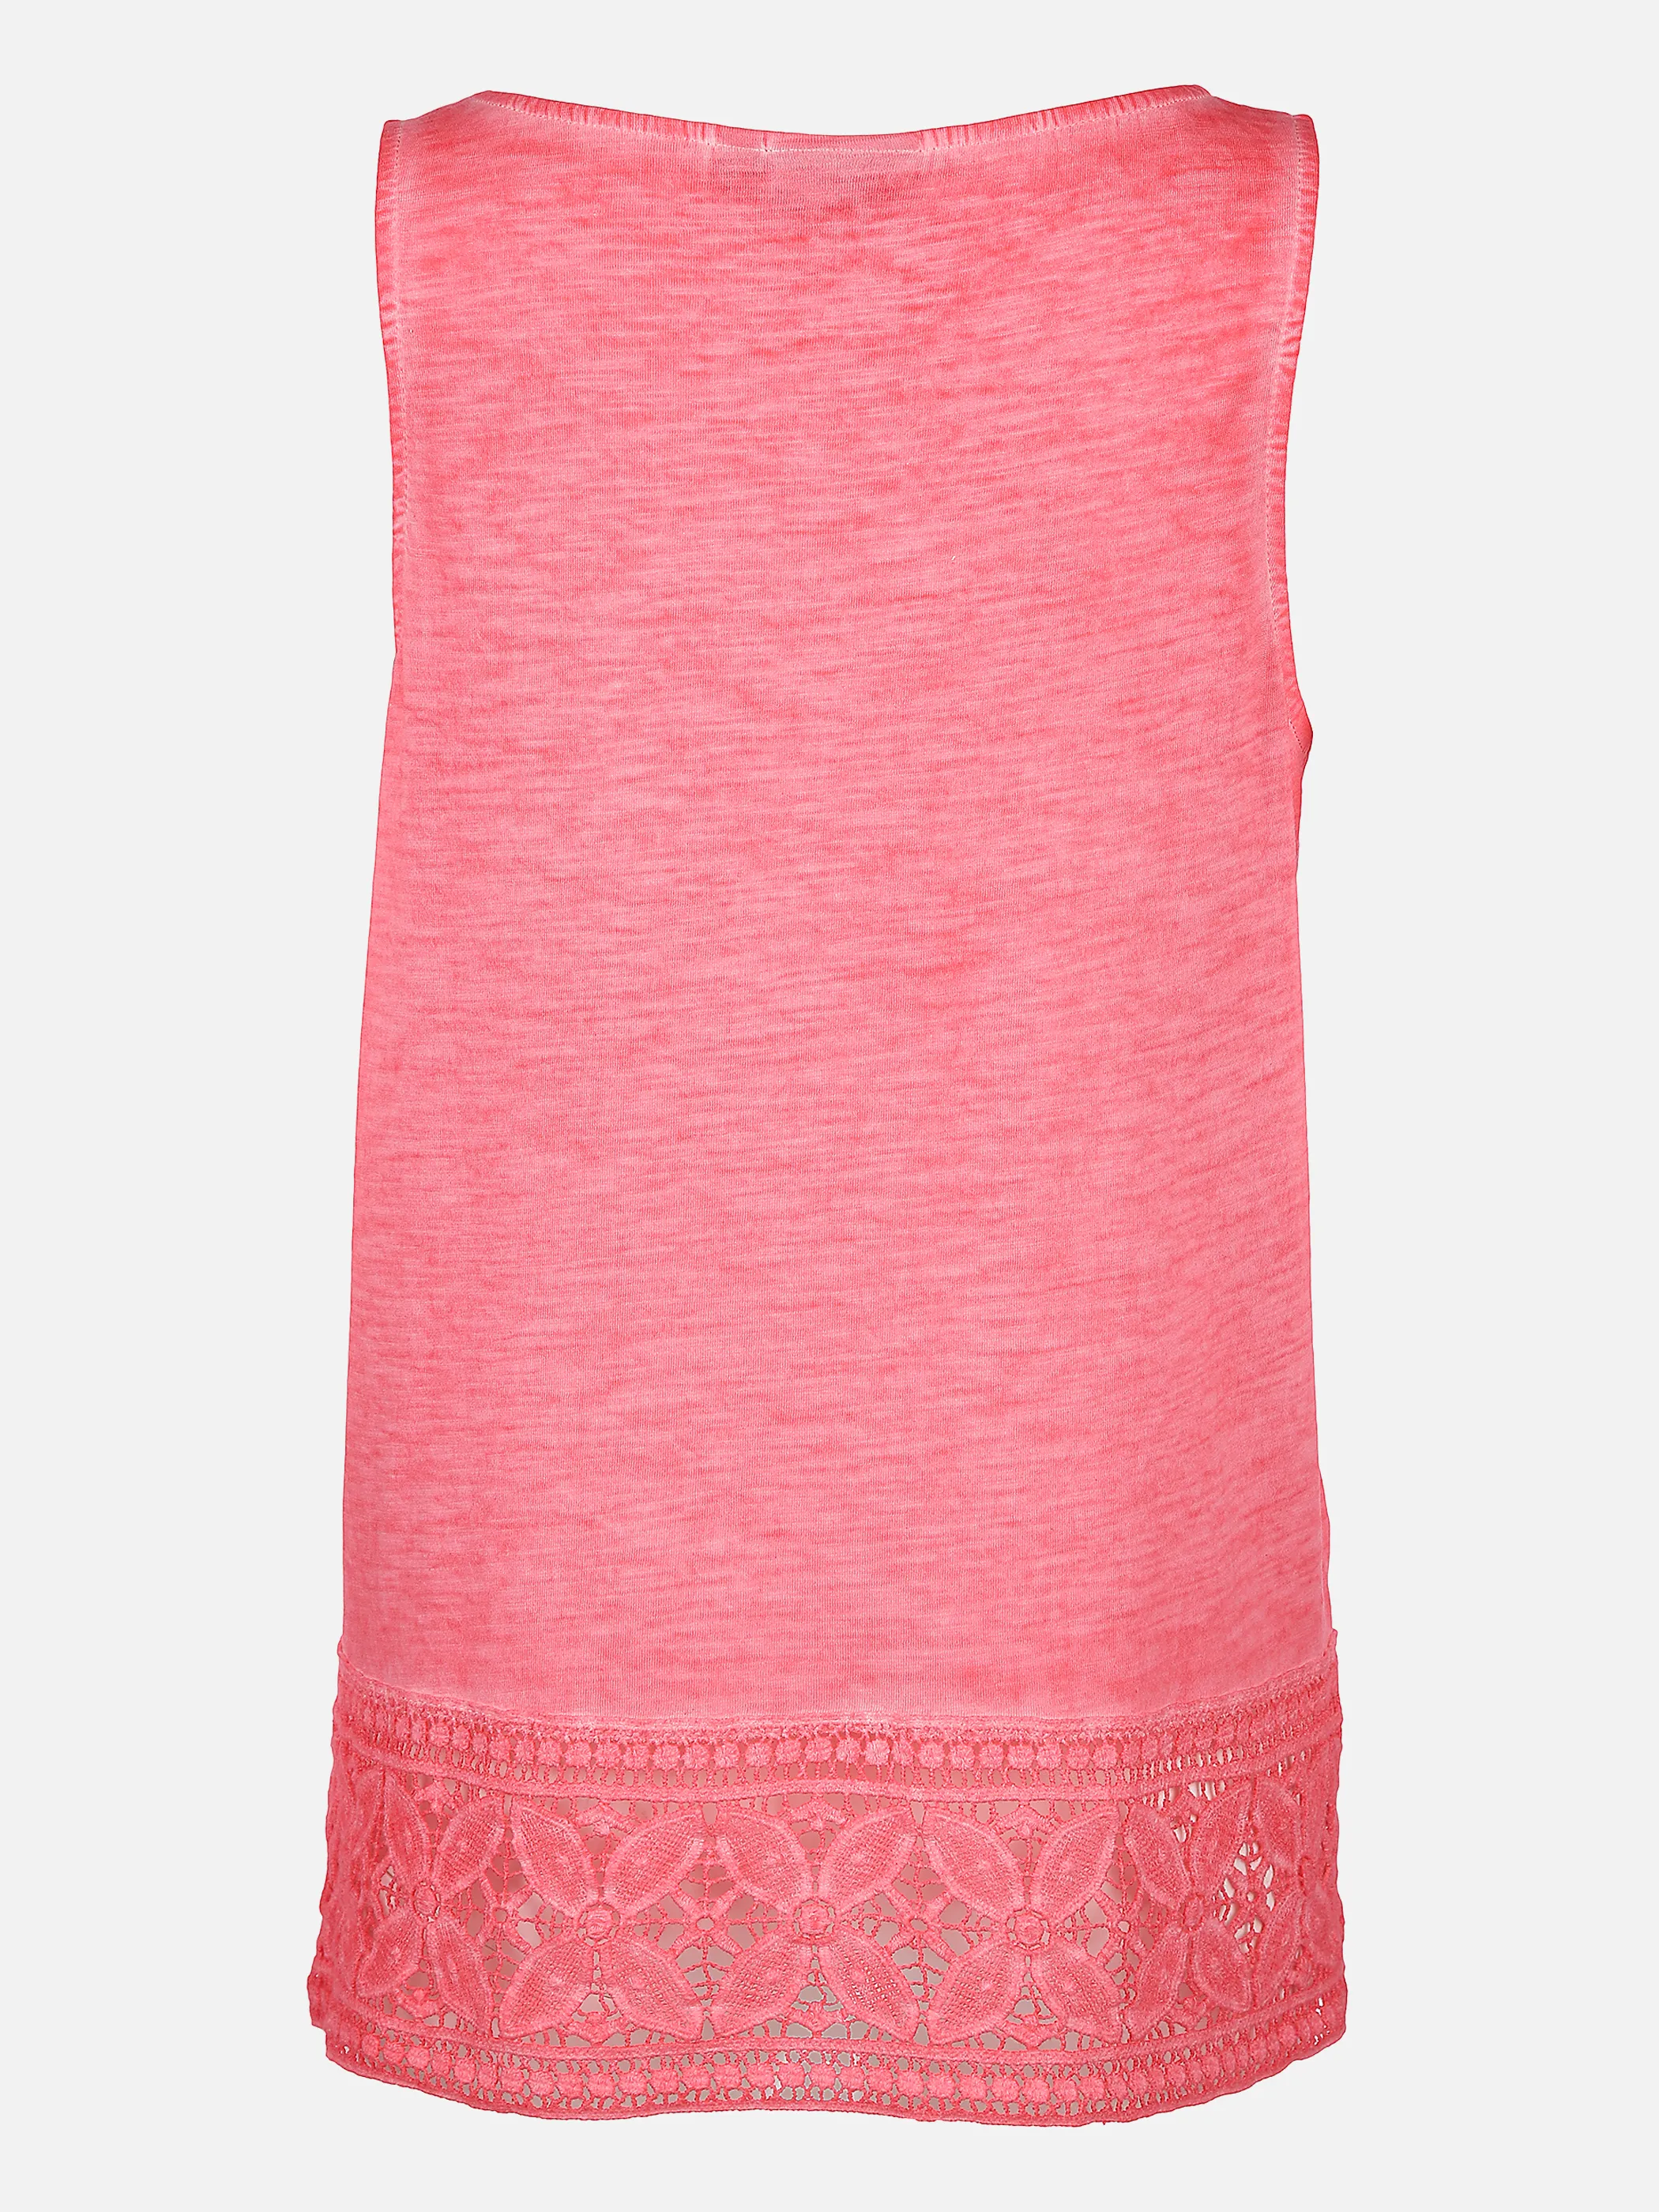 SURE Collection Da-Tank Top mit Spitze Rot 810382 STRAWBERRY 2